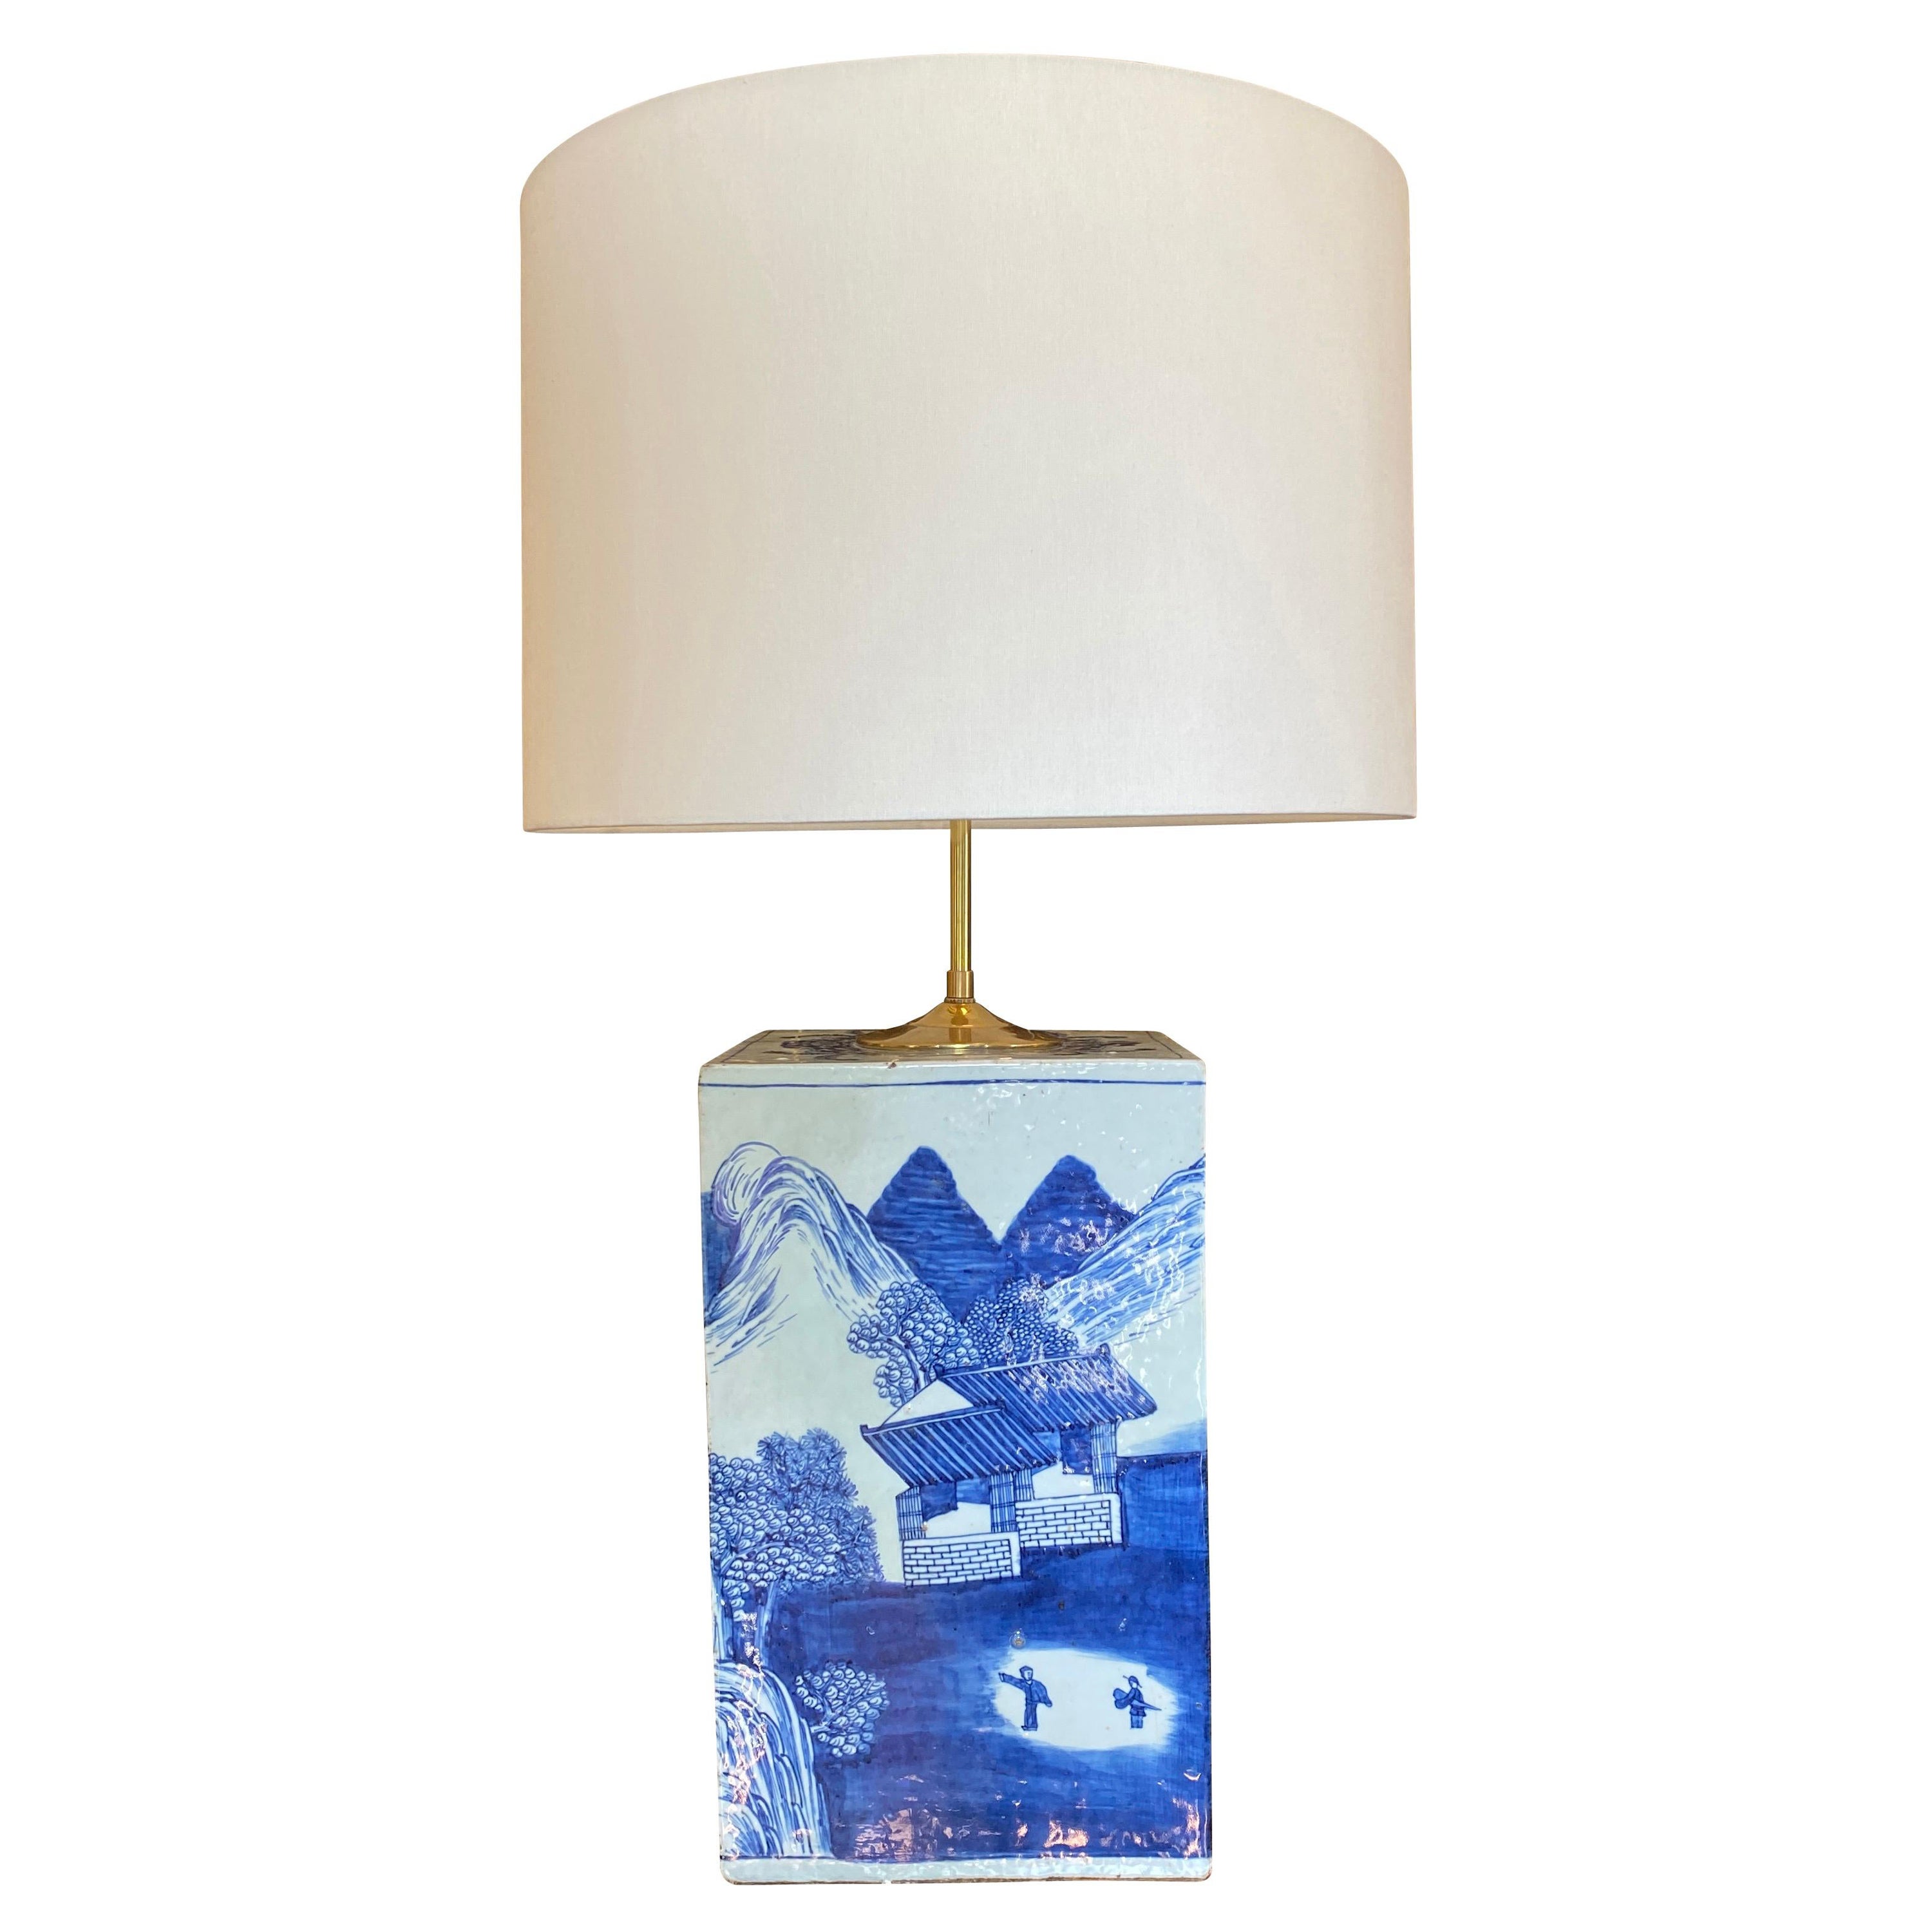 Chinese Export Blue and White Porcelain Tea Canister Lamp